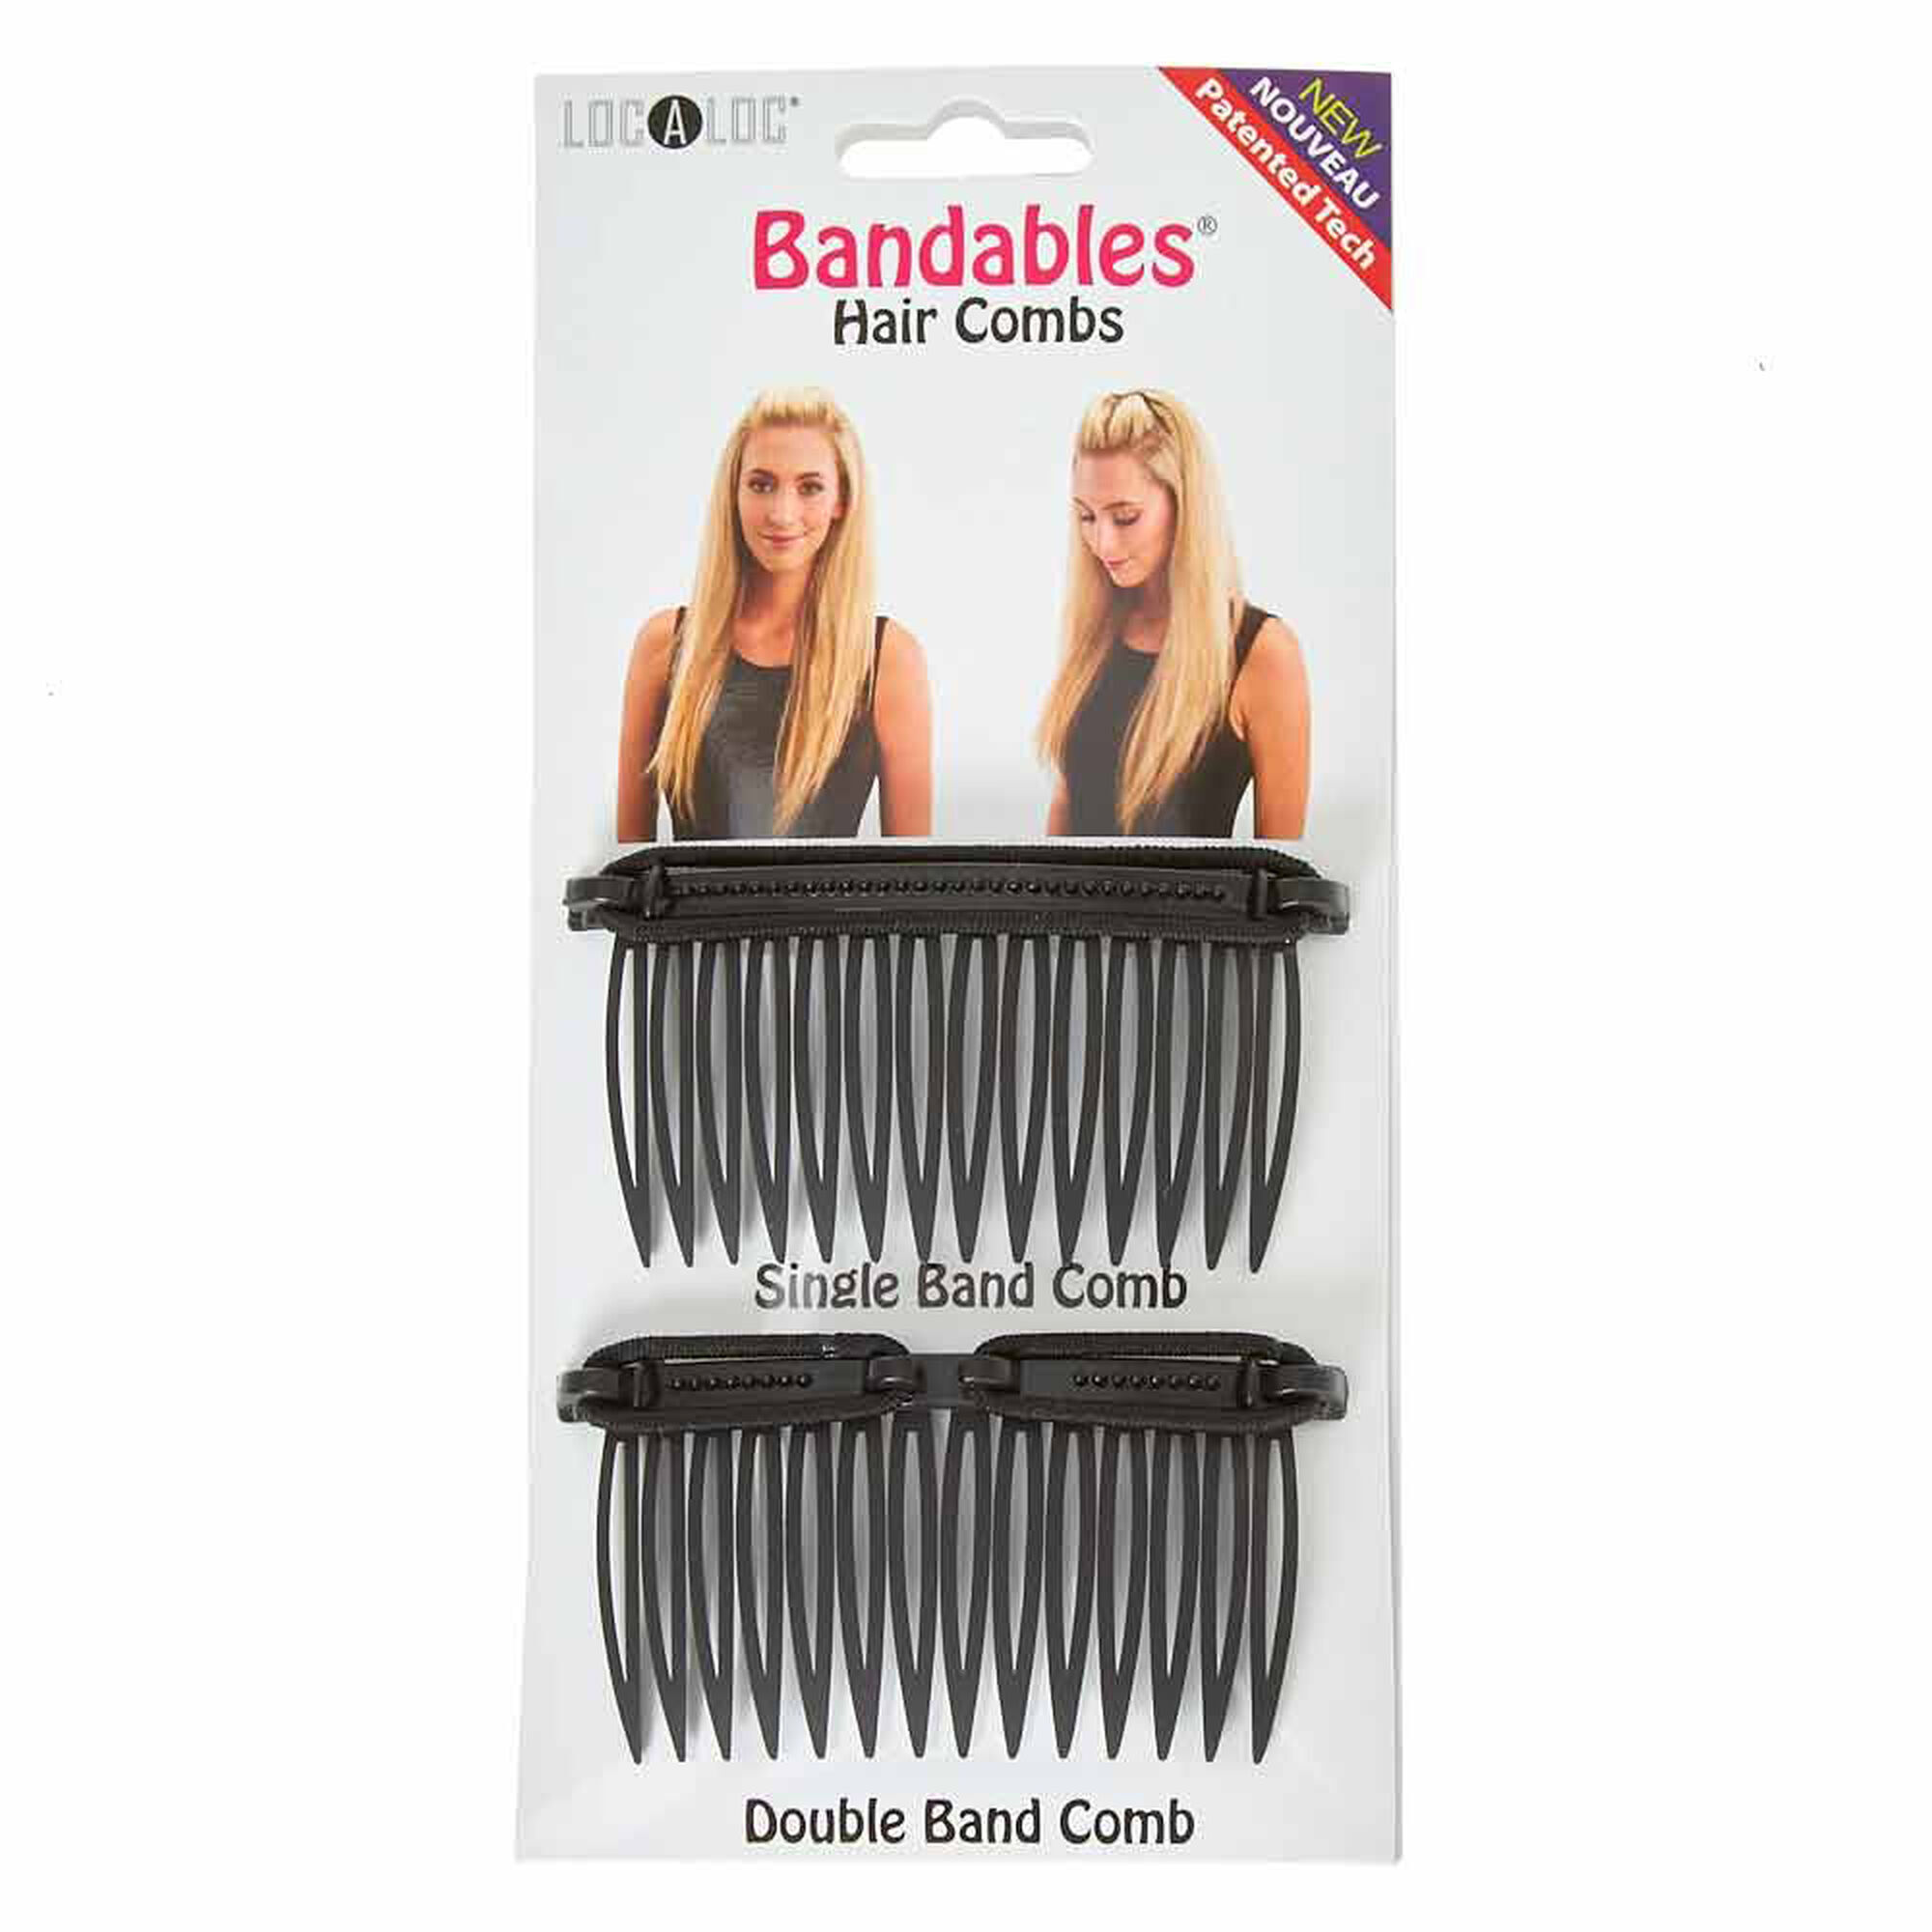 View Claires Localoc Bandables Hair Combs 2 Pack information